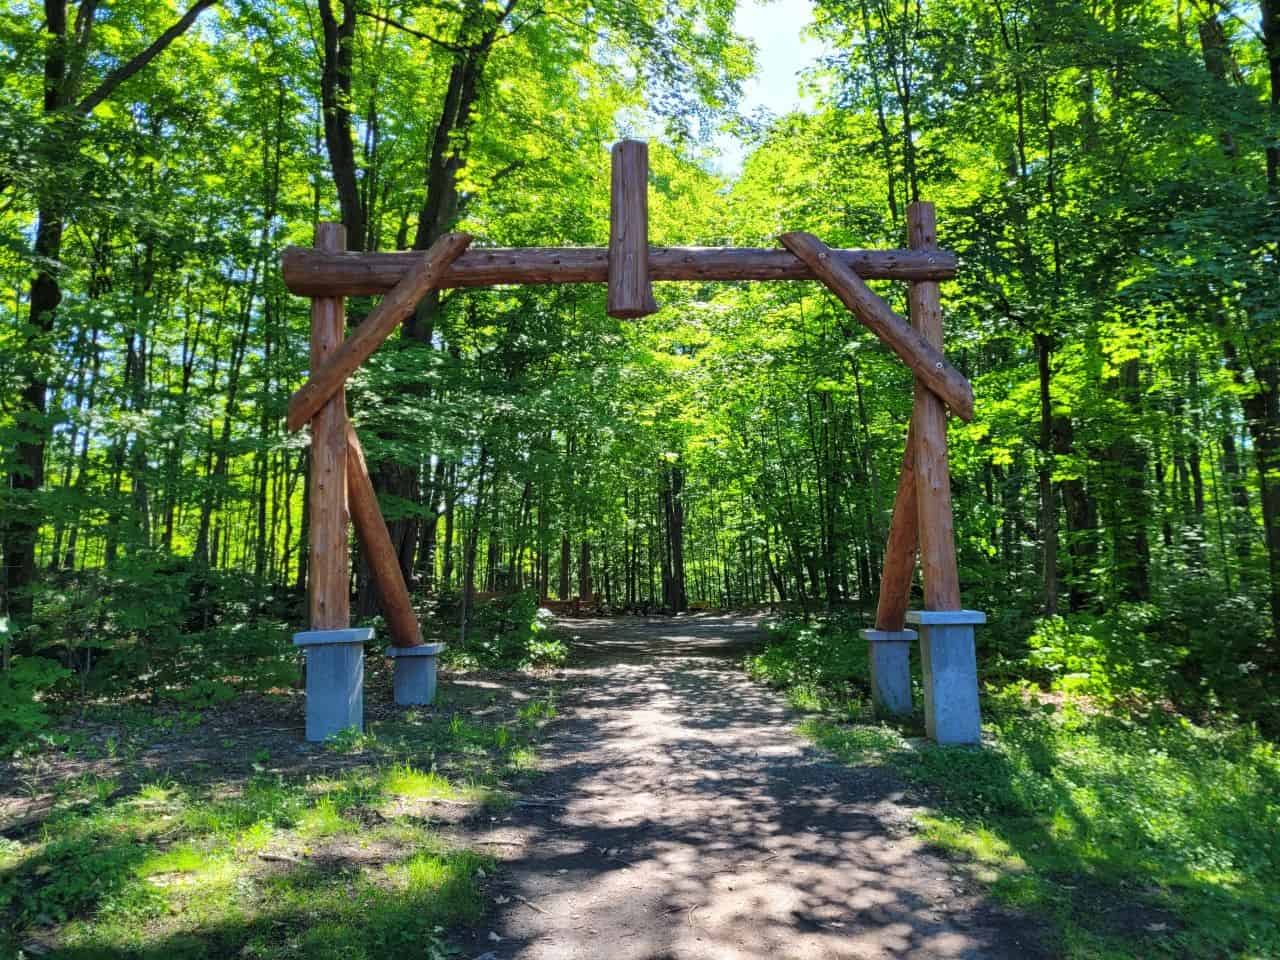 Gatineau Park has many tourist attractions, rest areas, parking lots, and trail access points